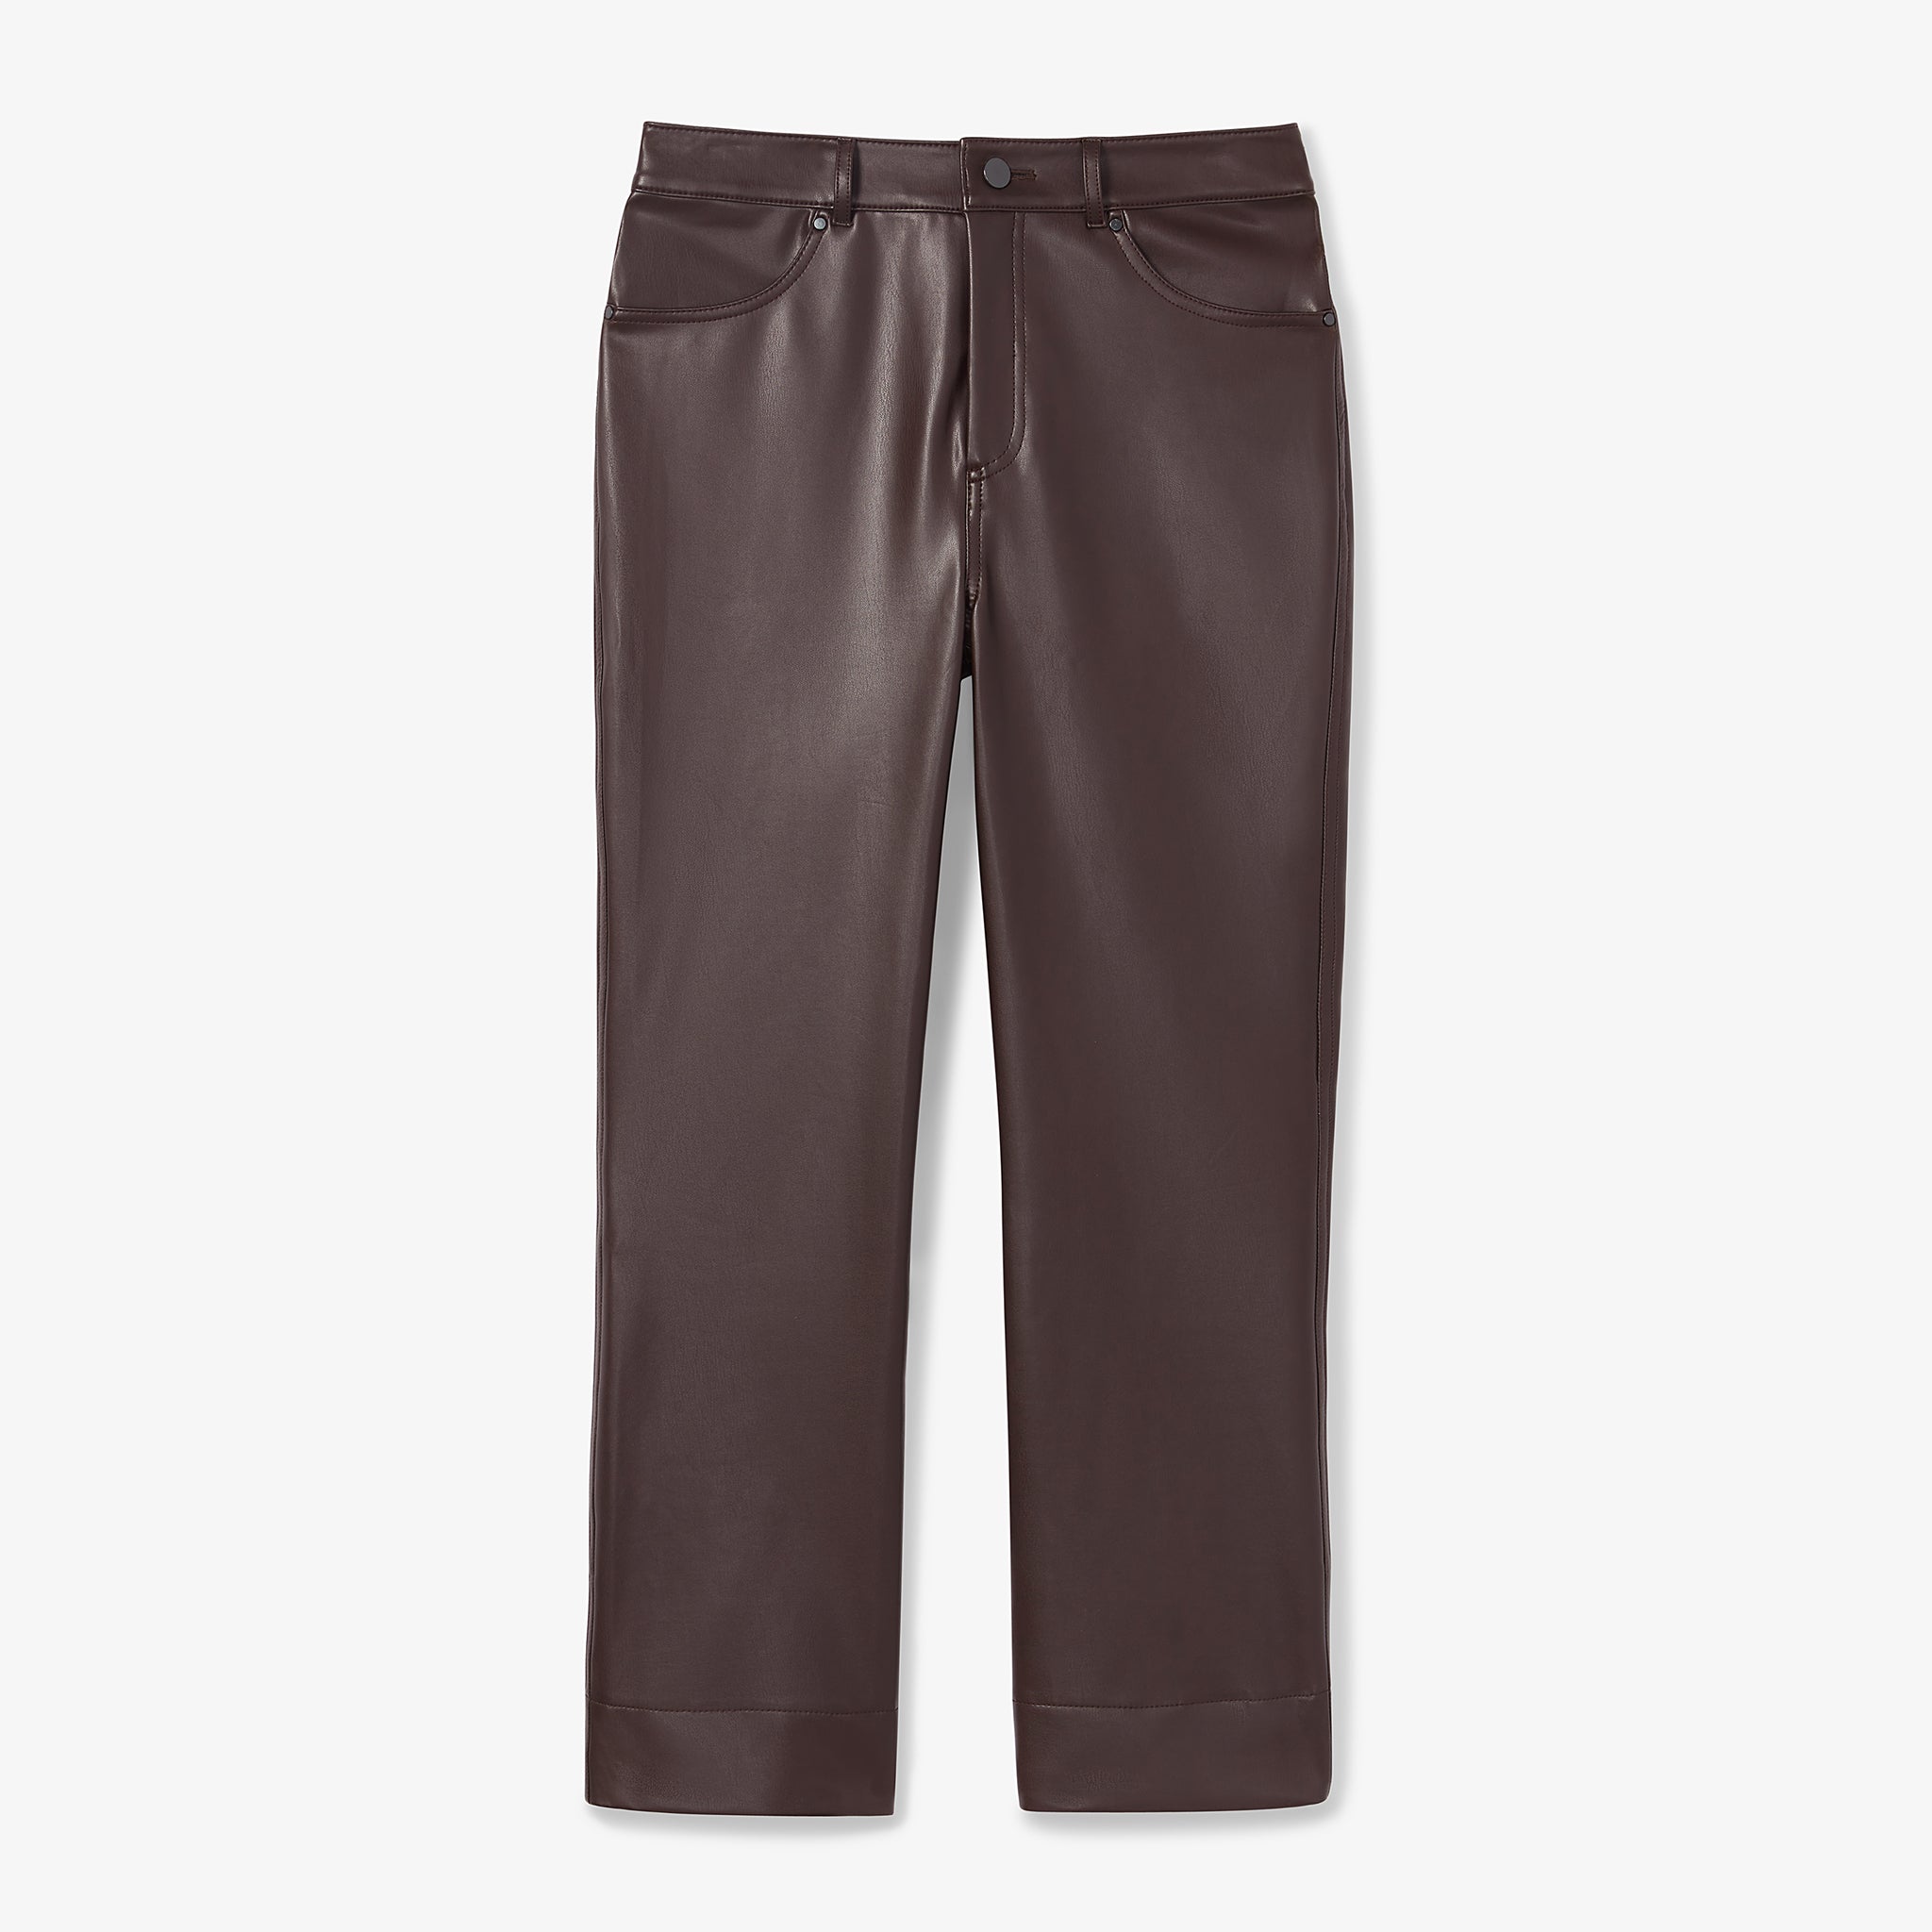 Packshot image of the archie pant in brown